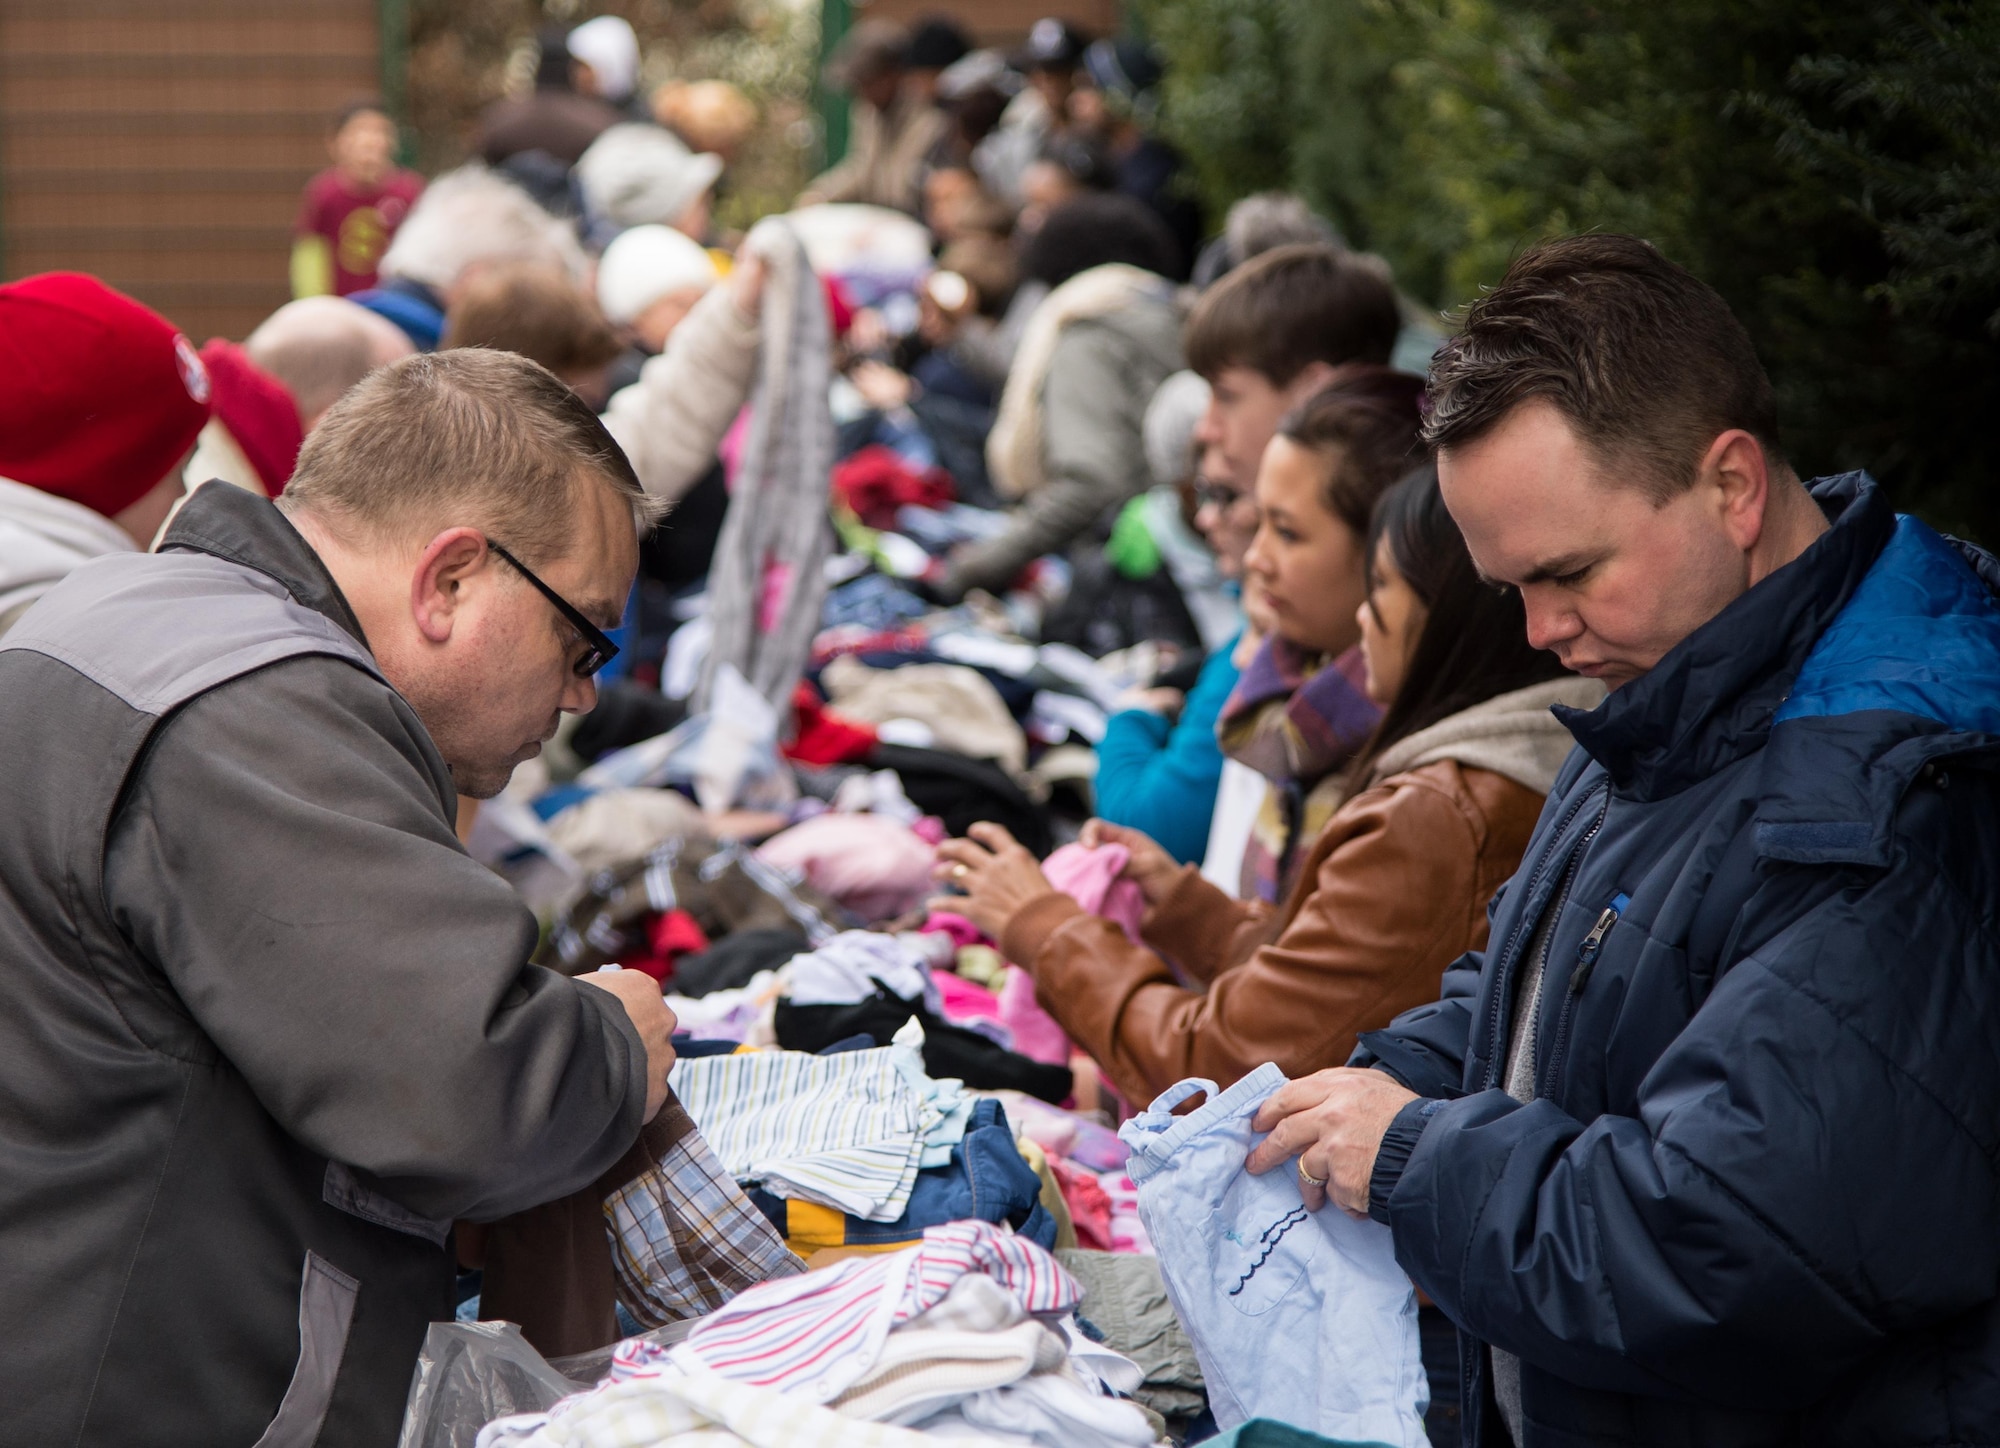 Maj. Matthew Boyd, right, arranges donated clothing Feb. 21, 2015, in Kaiserslautern, Germany. Boyd continues his family’s tradition of serving in the military, working as a chaplain and offering guidance to those in need. Boyd is the 86th Airlift Wing chaplain. (Courtesy photo)